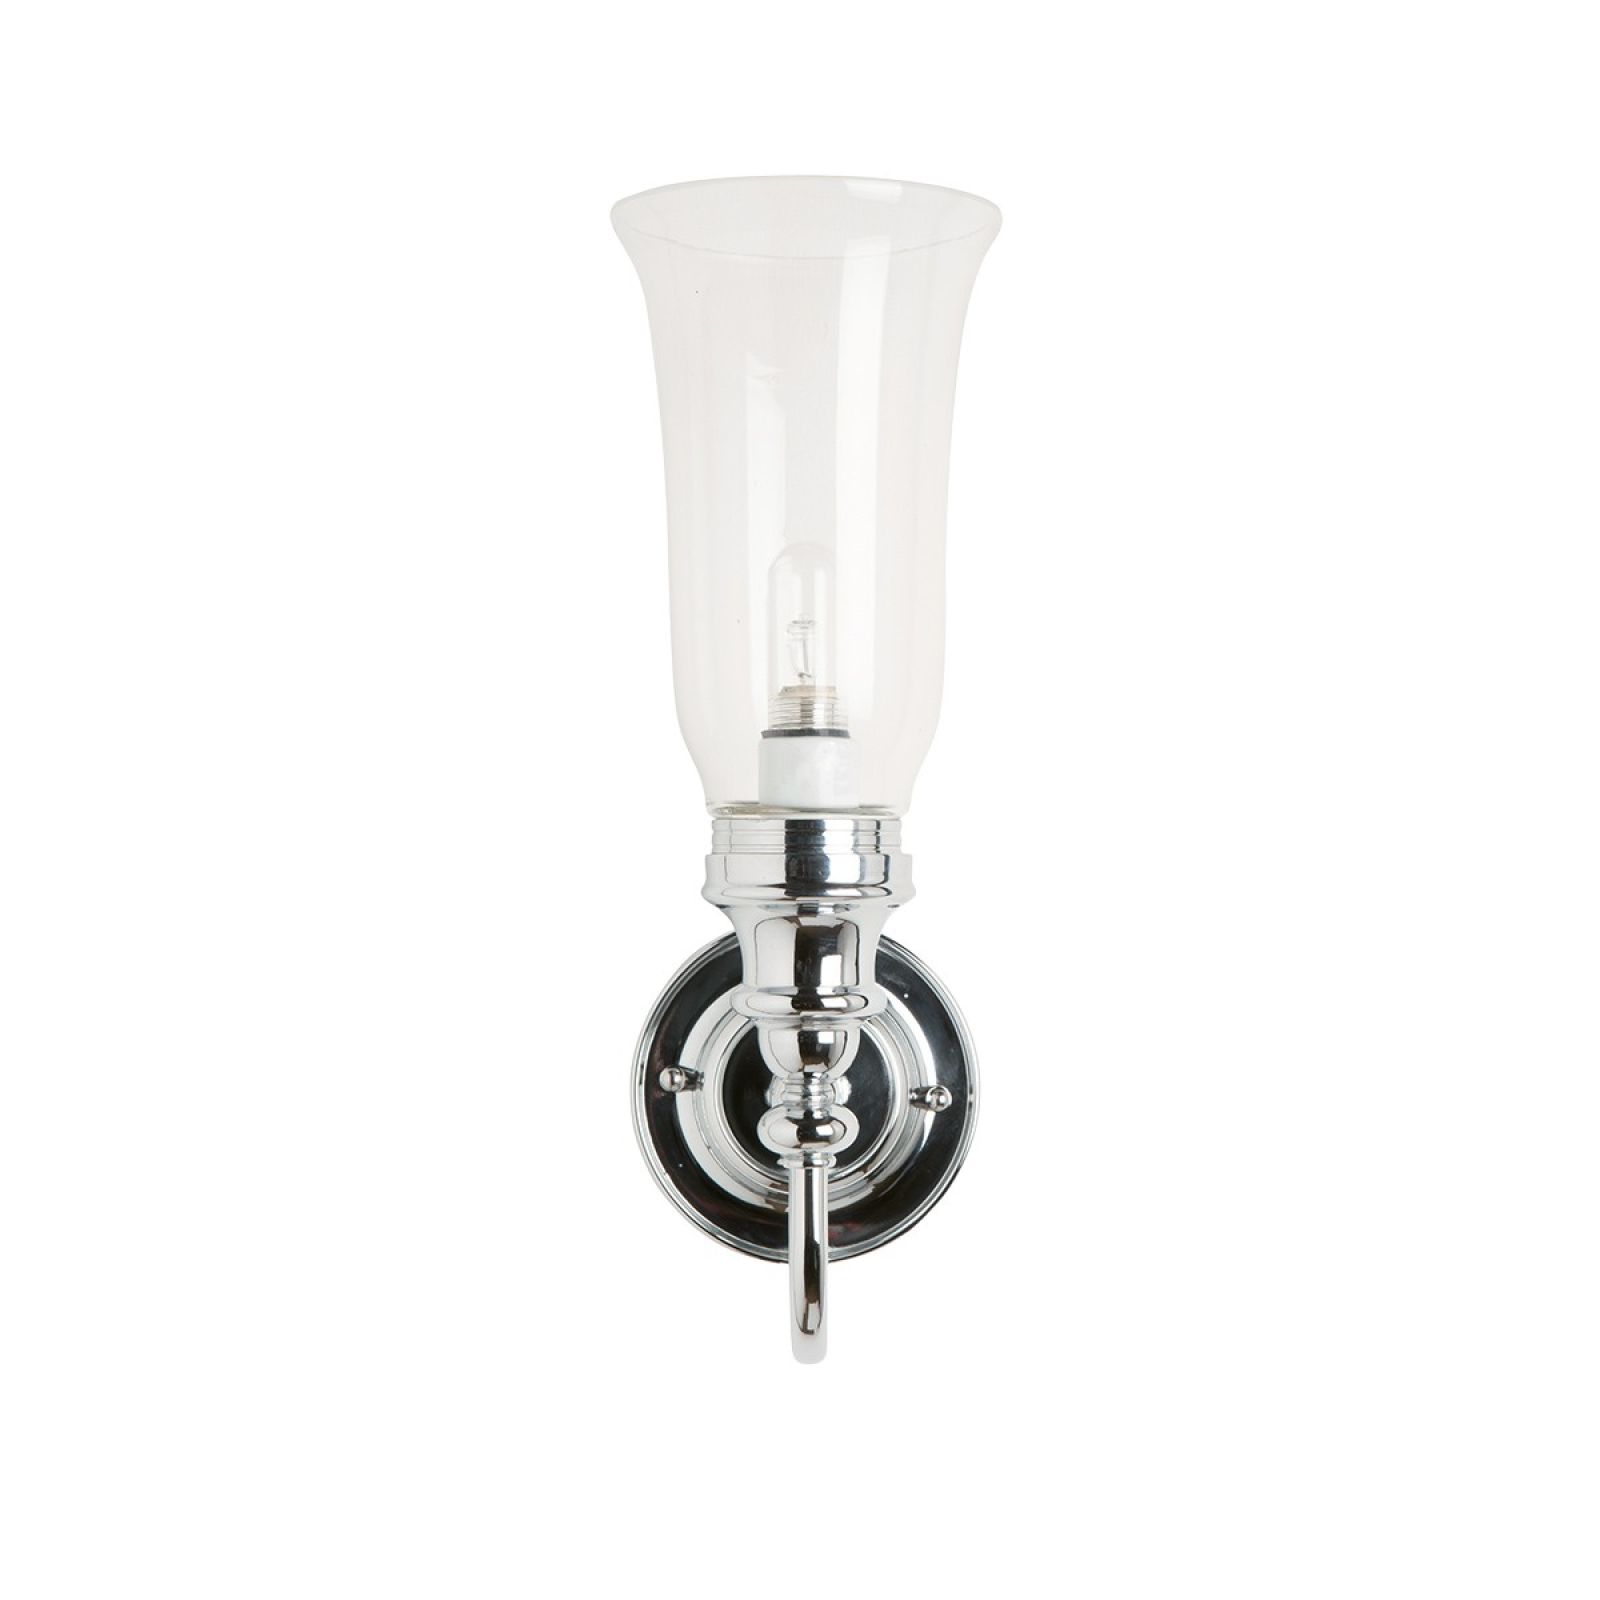 Clear vase shaped bathroom light with finial detail base